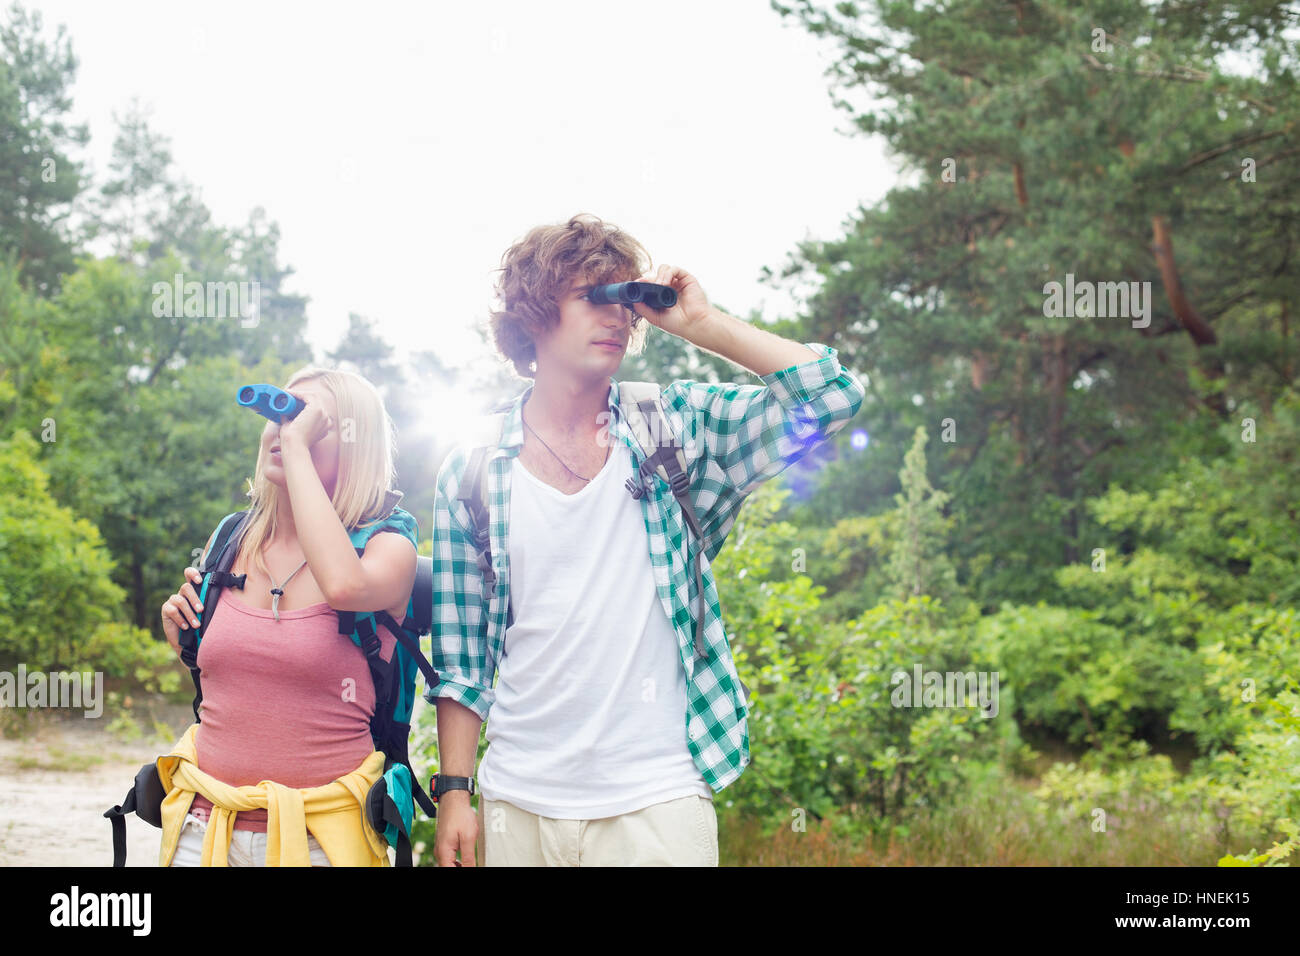 Young couple using binoculars while hiking in forest Stock Photo